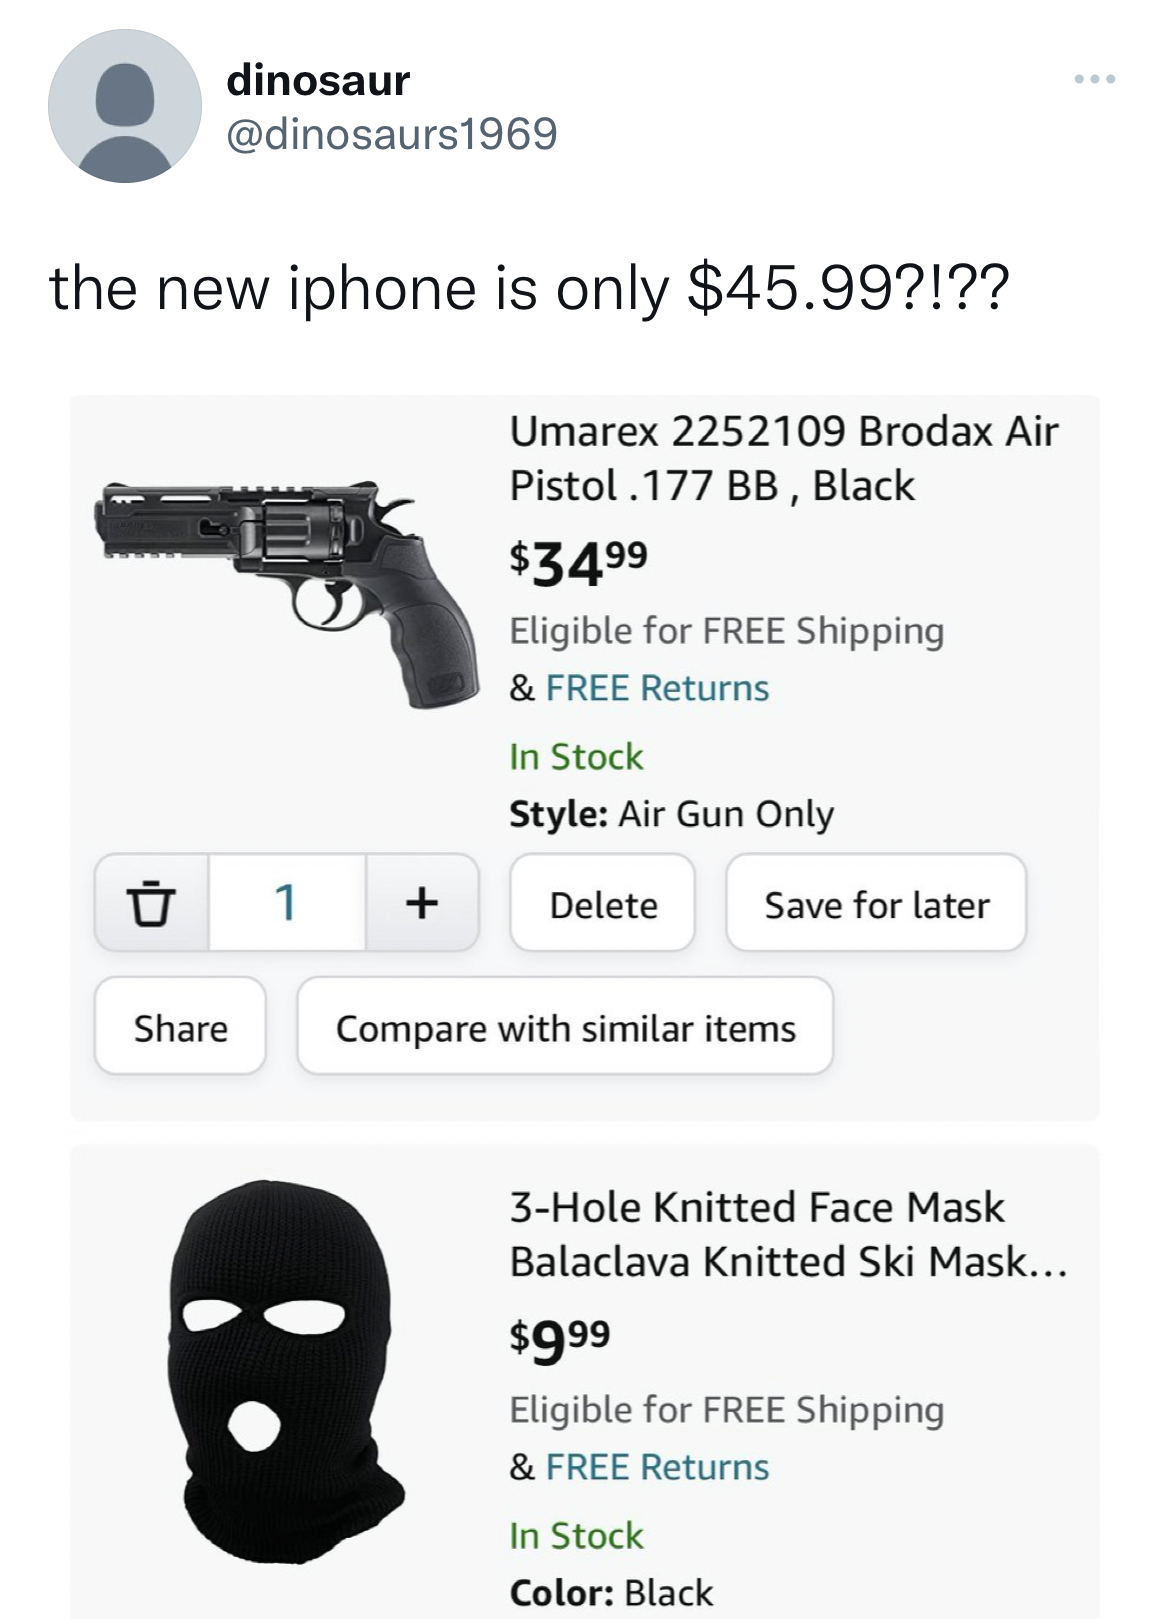 funny quick wit tweets - angle - dinosaur the new iphone is only $45.99?!?? Umarex 2252109 Brodax Air Pistol .177 Bb, Black 1 $34.99 Eligible for Free Shipping & Free Returns In Stock Style Air Gun Only Delete Save for later Compare with similar items 3Ho